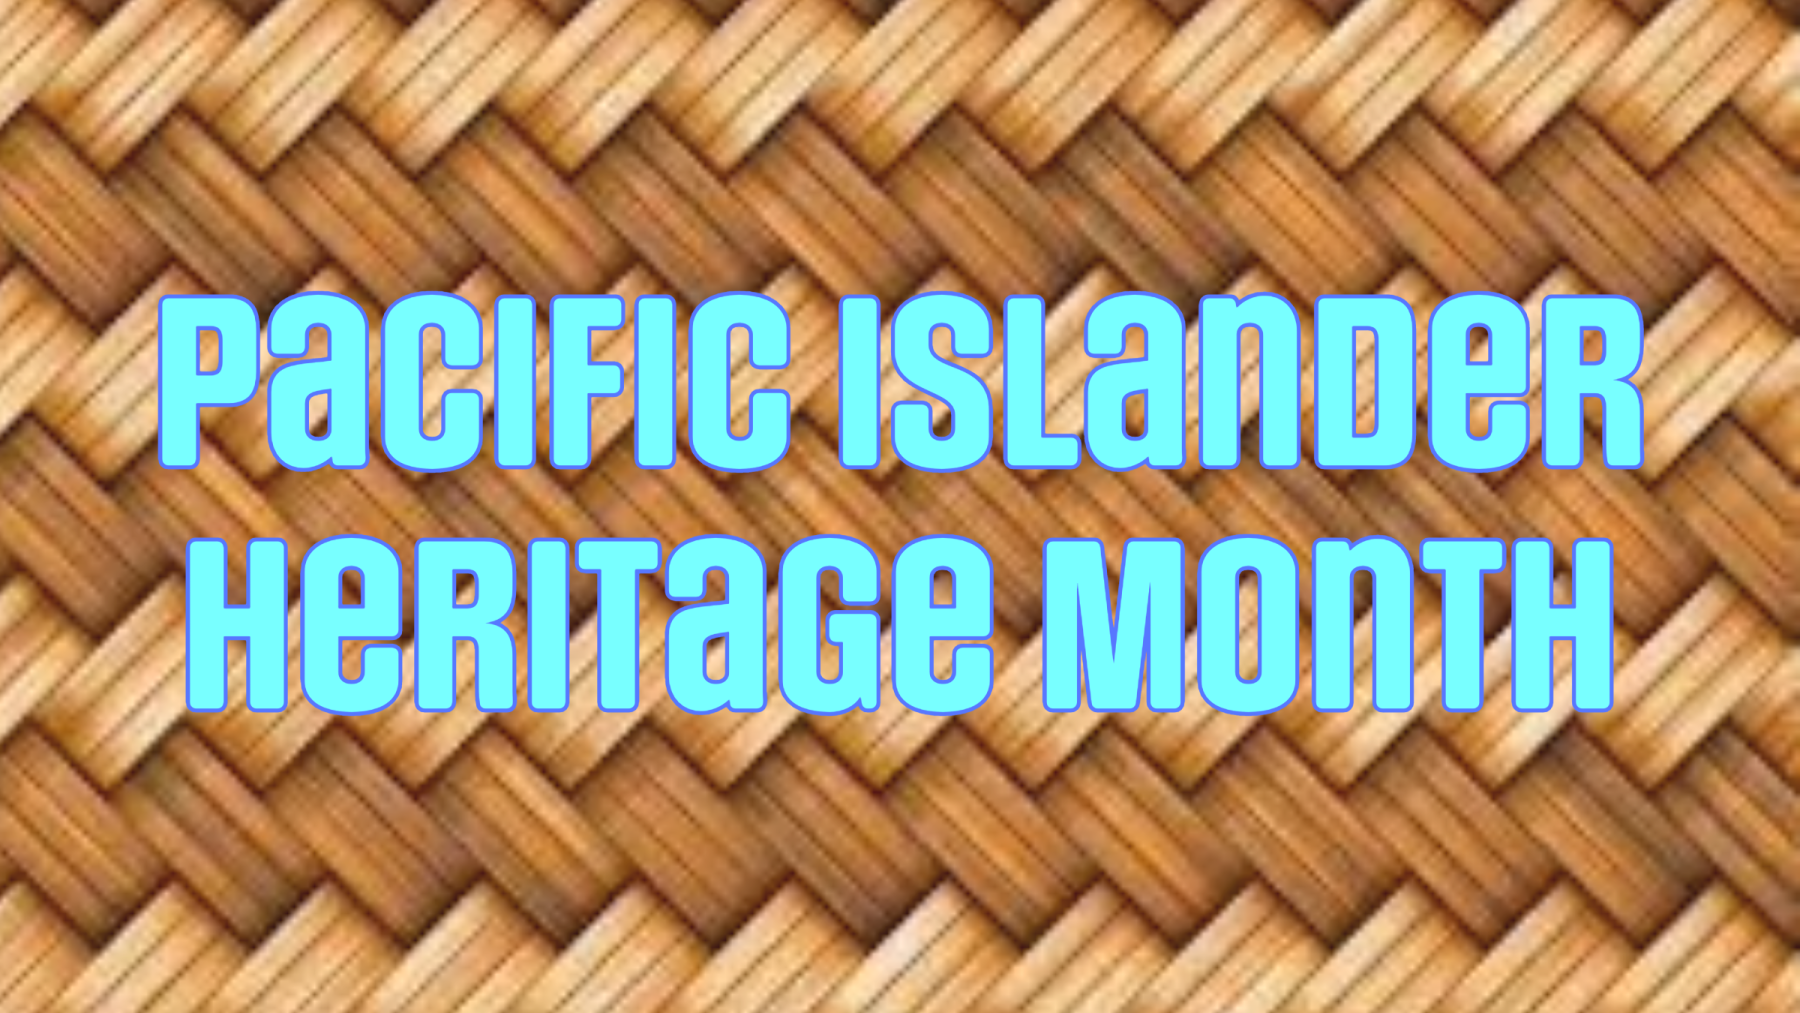 Pacific Islander Heritage Month in an aqua colored text on top of a traditional Polynesian mat.